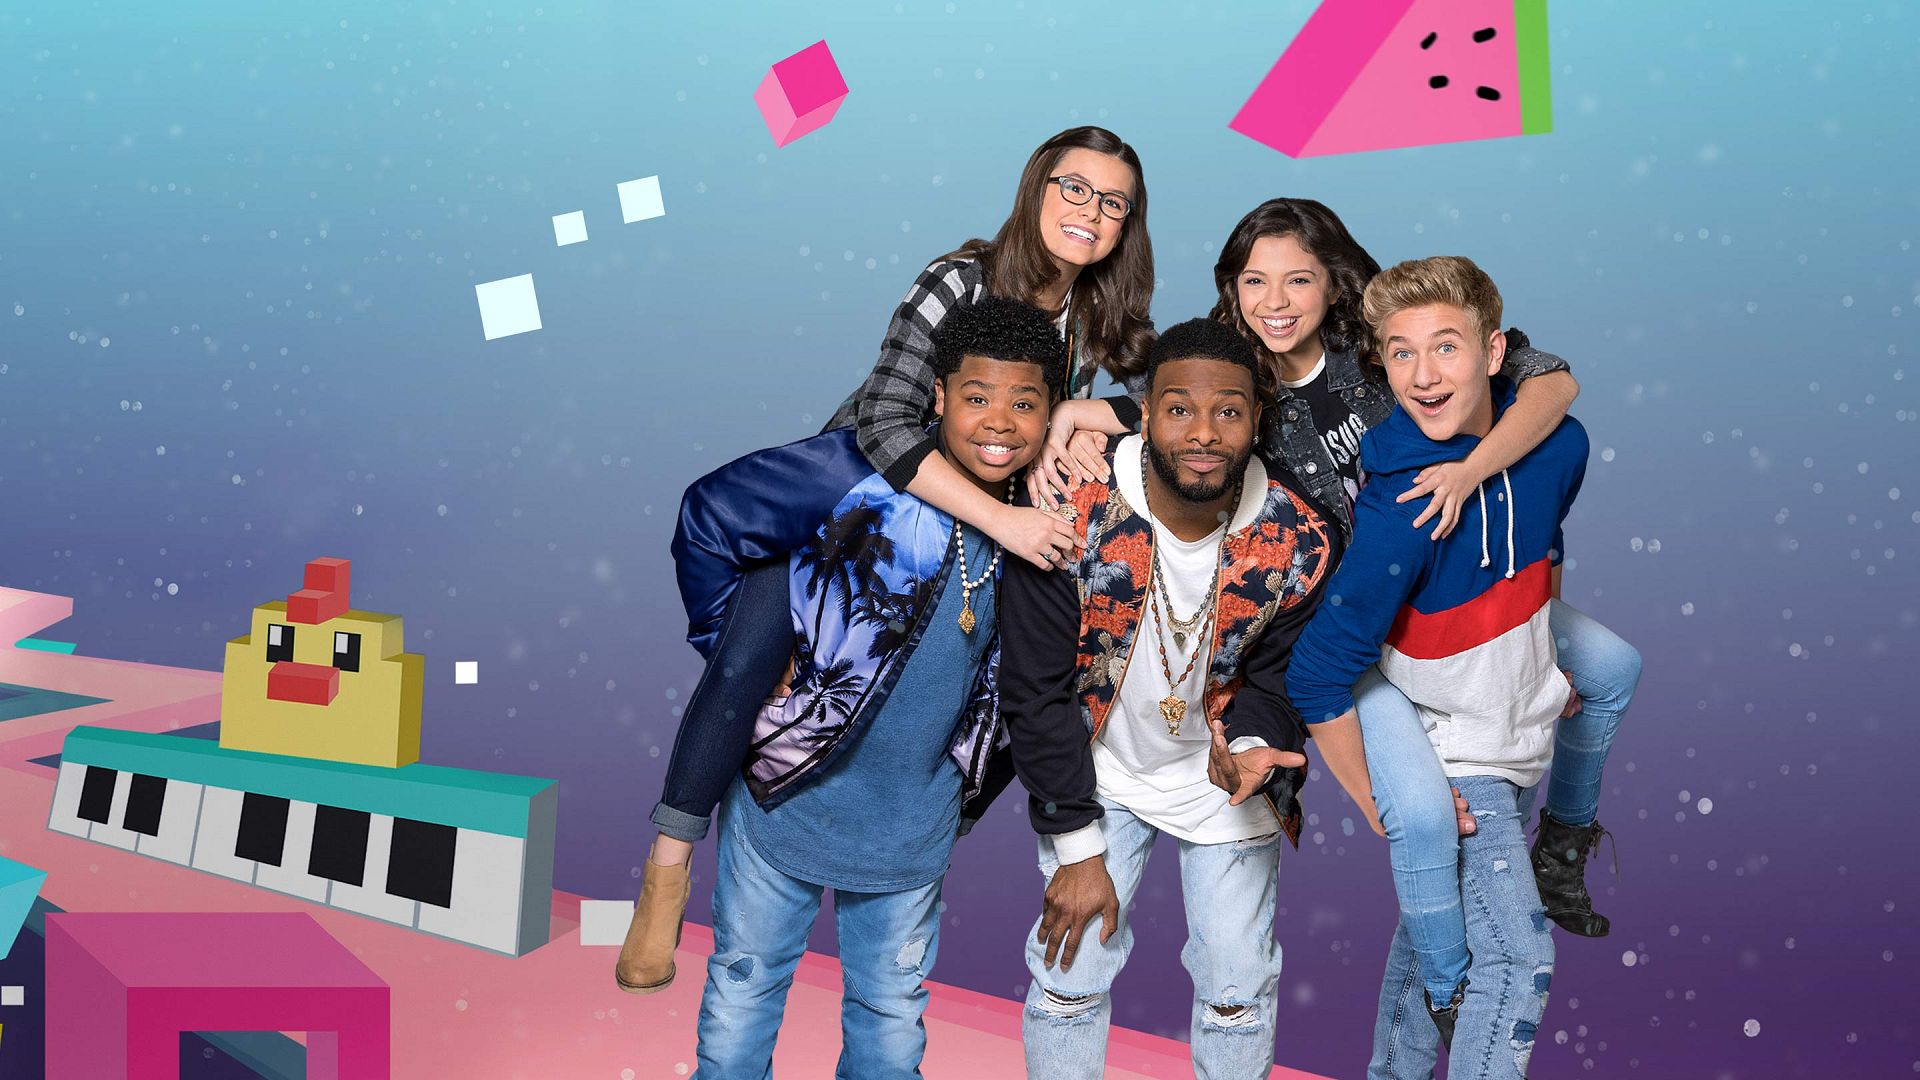 Game Shakers - Antes e Depois - Then and Now (2020) 